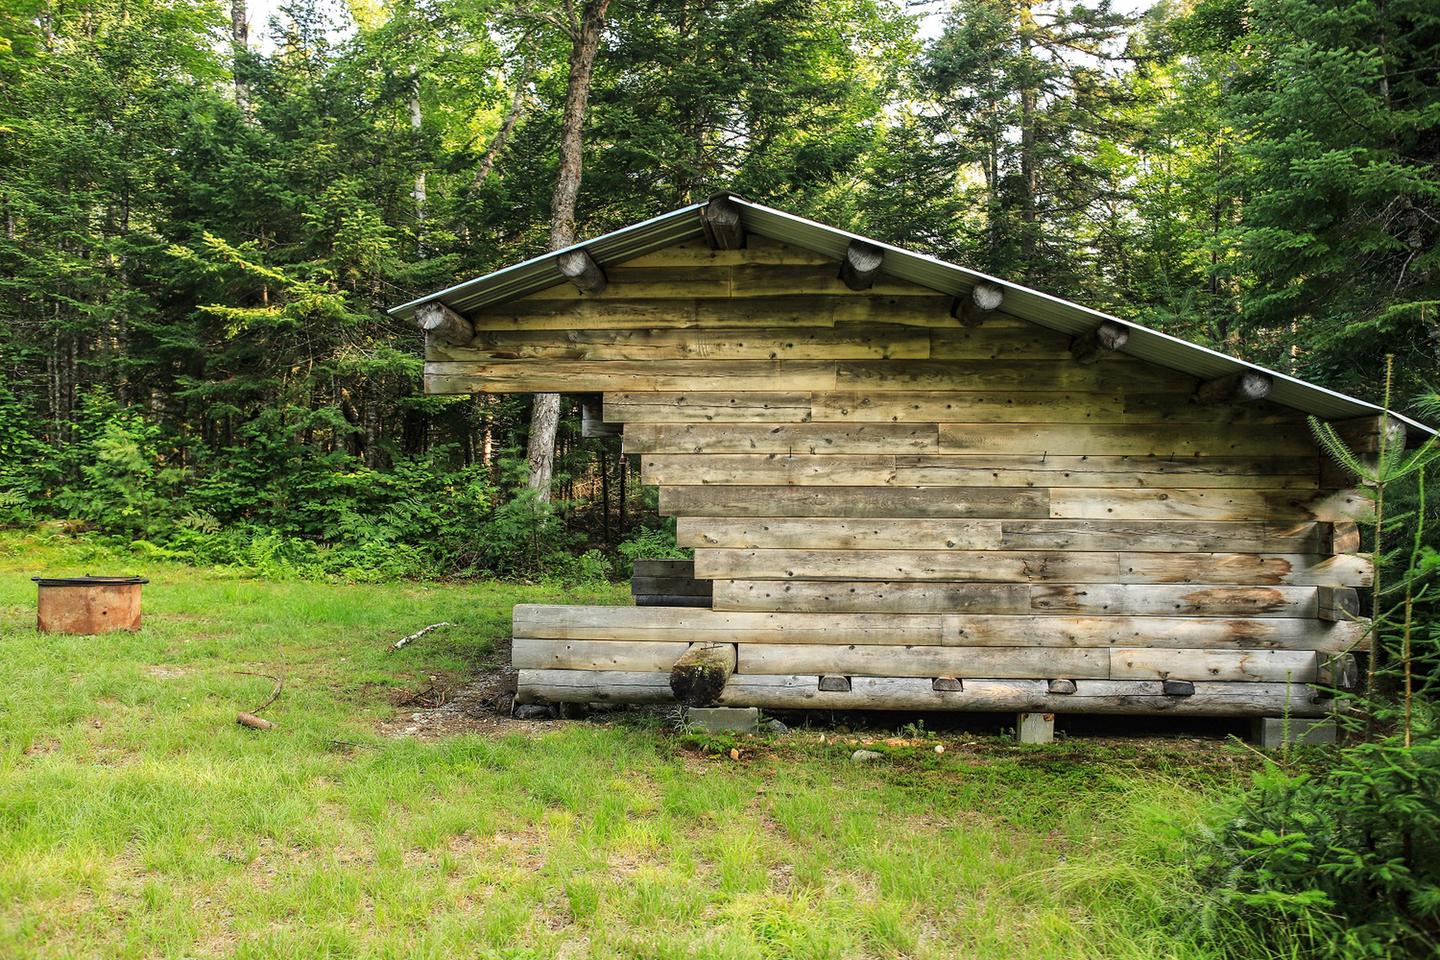 Facing the side of the lean-to. A raised wooden structure made of logs with an angled roof covering. A fire ring is available for use! Remember to contact the Maine Forest Service at 207-435-7963 before your trip. 